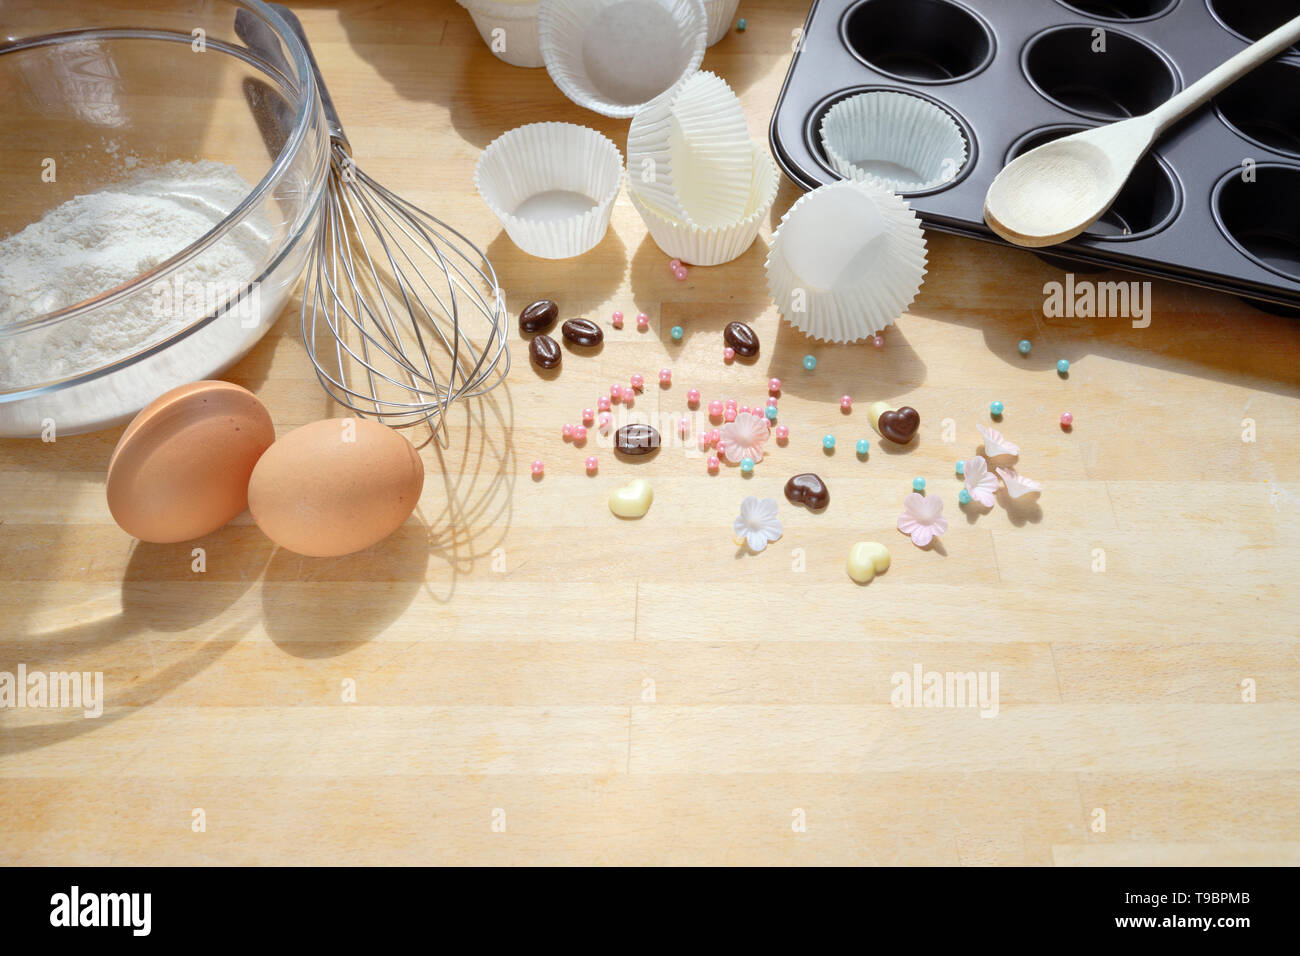 baking cupcakes, tools and ingredients on a wooden kitchen board, copy space, selected focus Stock Photo